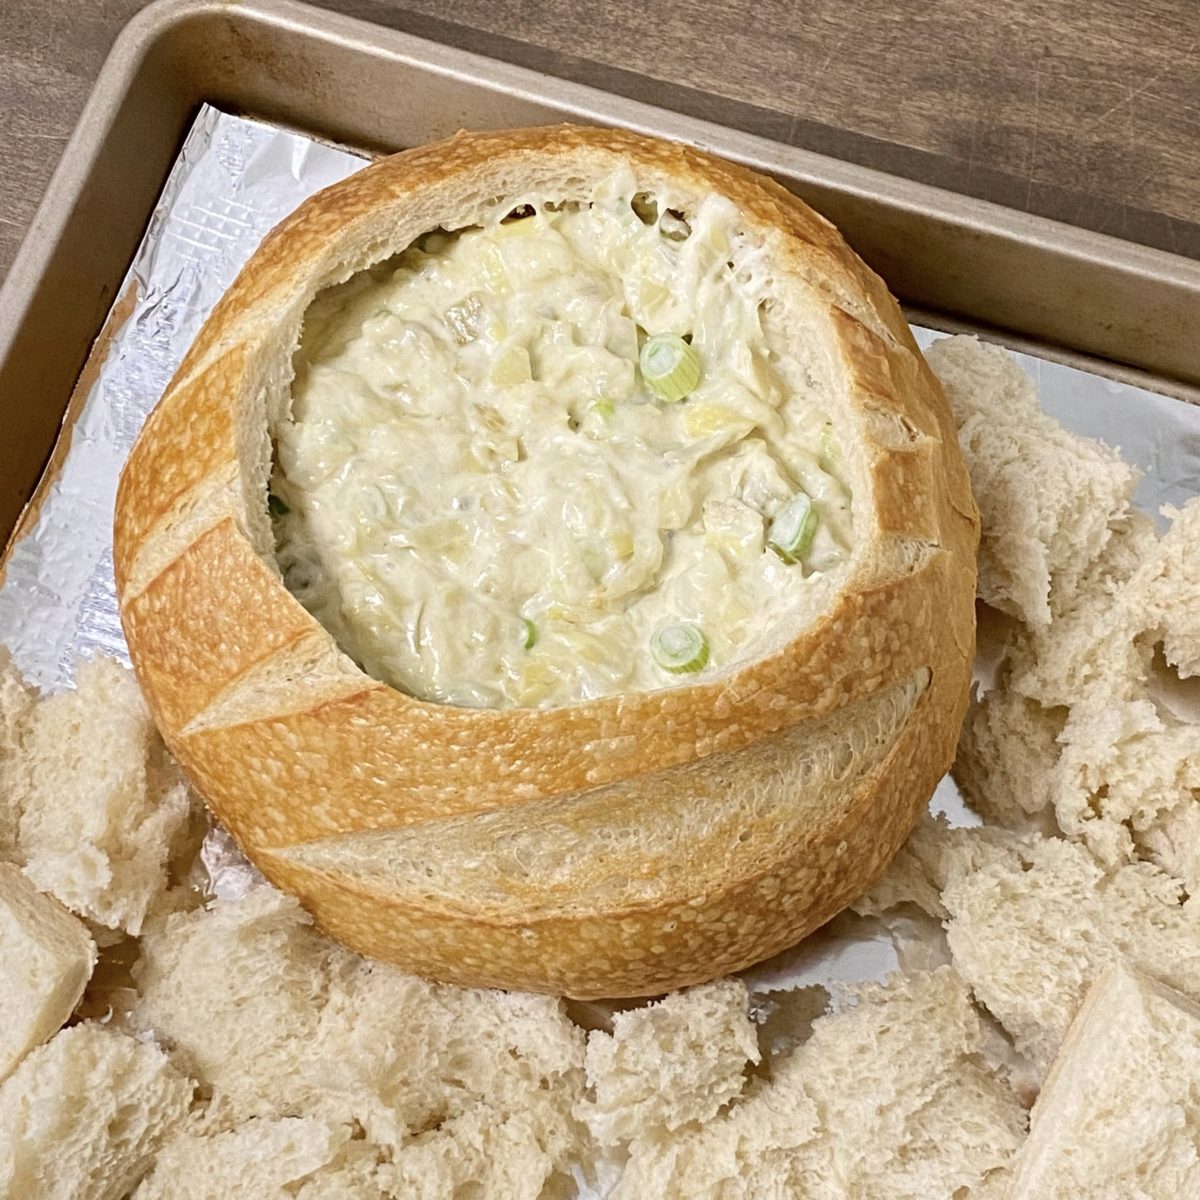 The best artichoke dip in a bread bowl getting ready to bake in the oven.